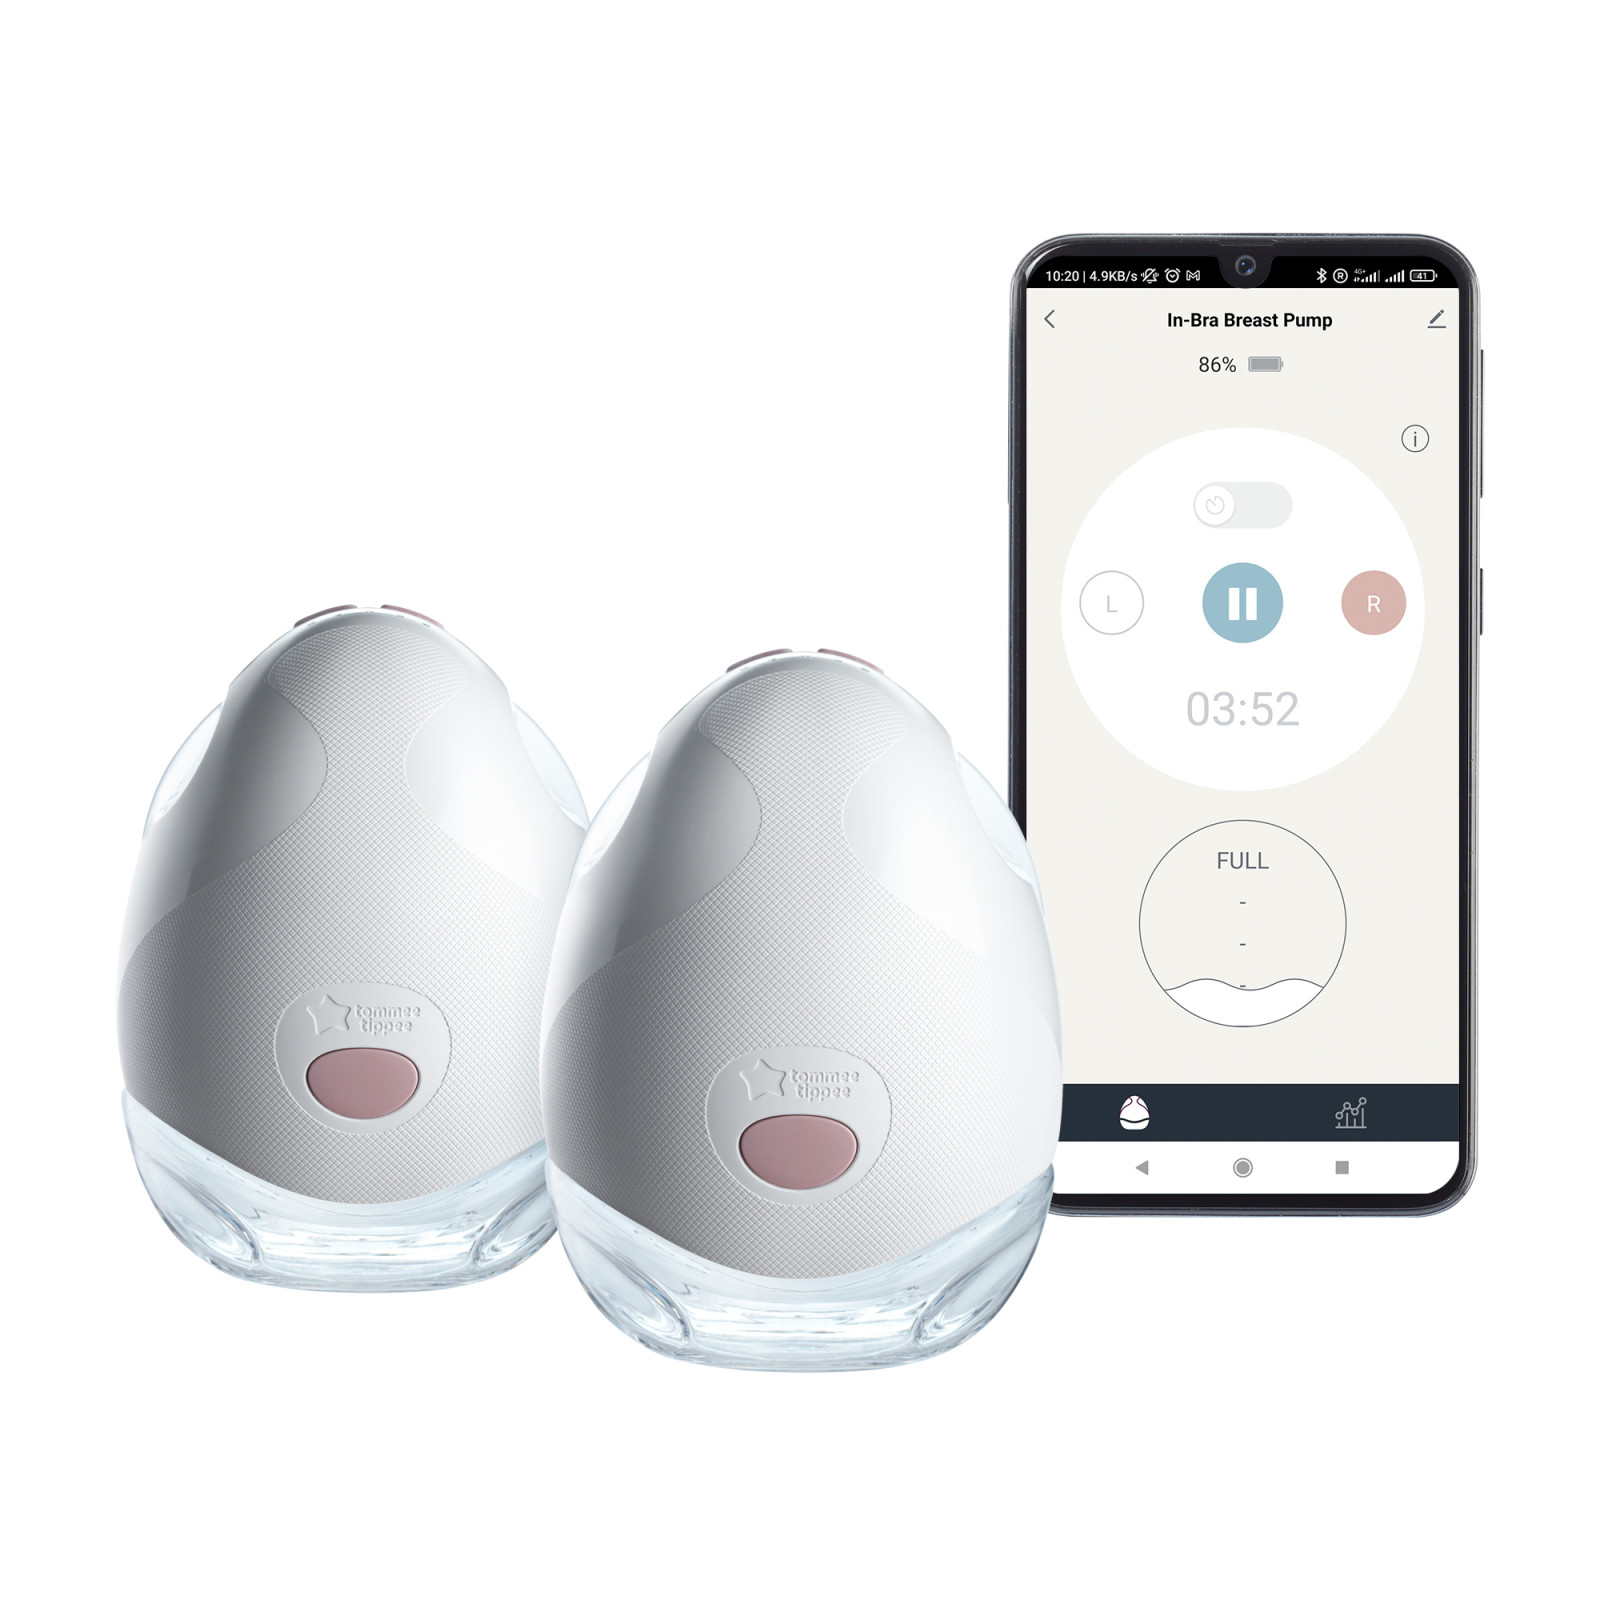 Tommee Tippee Double Electric Wearable Breast Pump, Hands-Free, In-Bra Breastfeeding Pump, Portable, Quiet - image 1 of 8